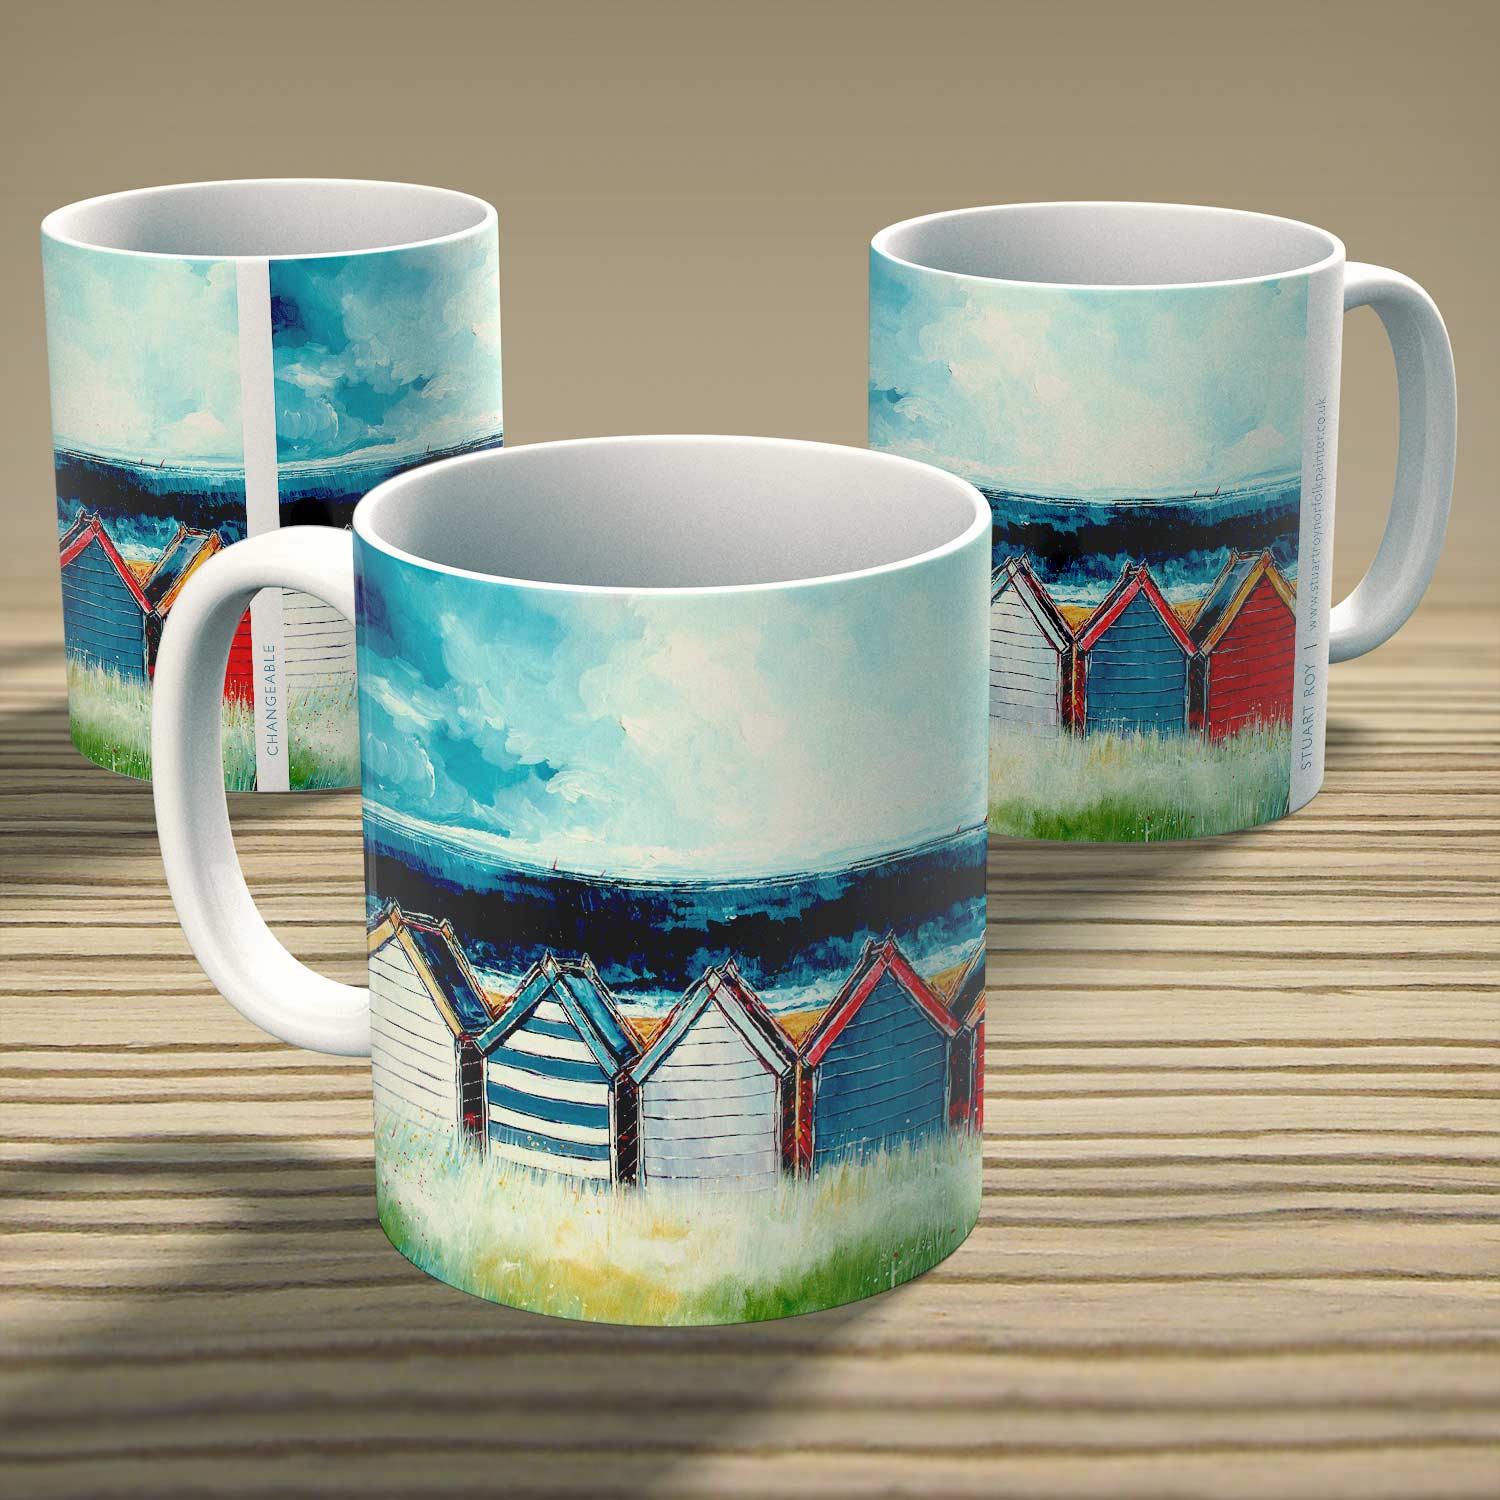 Changeable Mug from an original painting by artist Stuart Roy